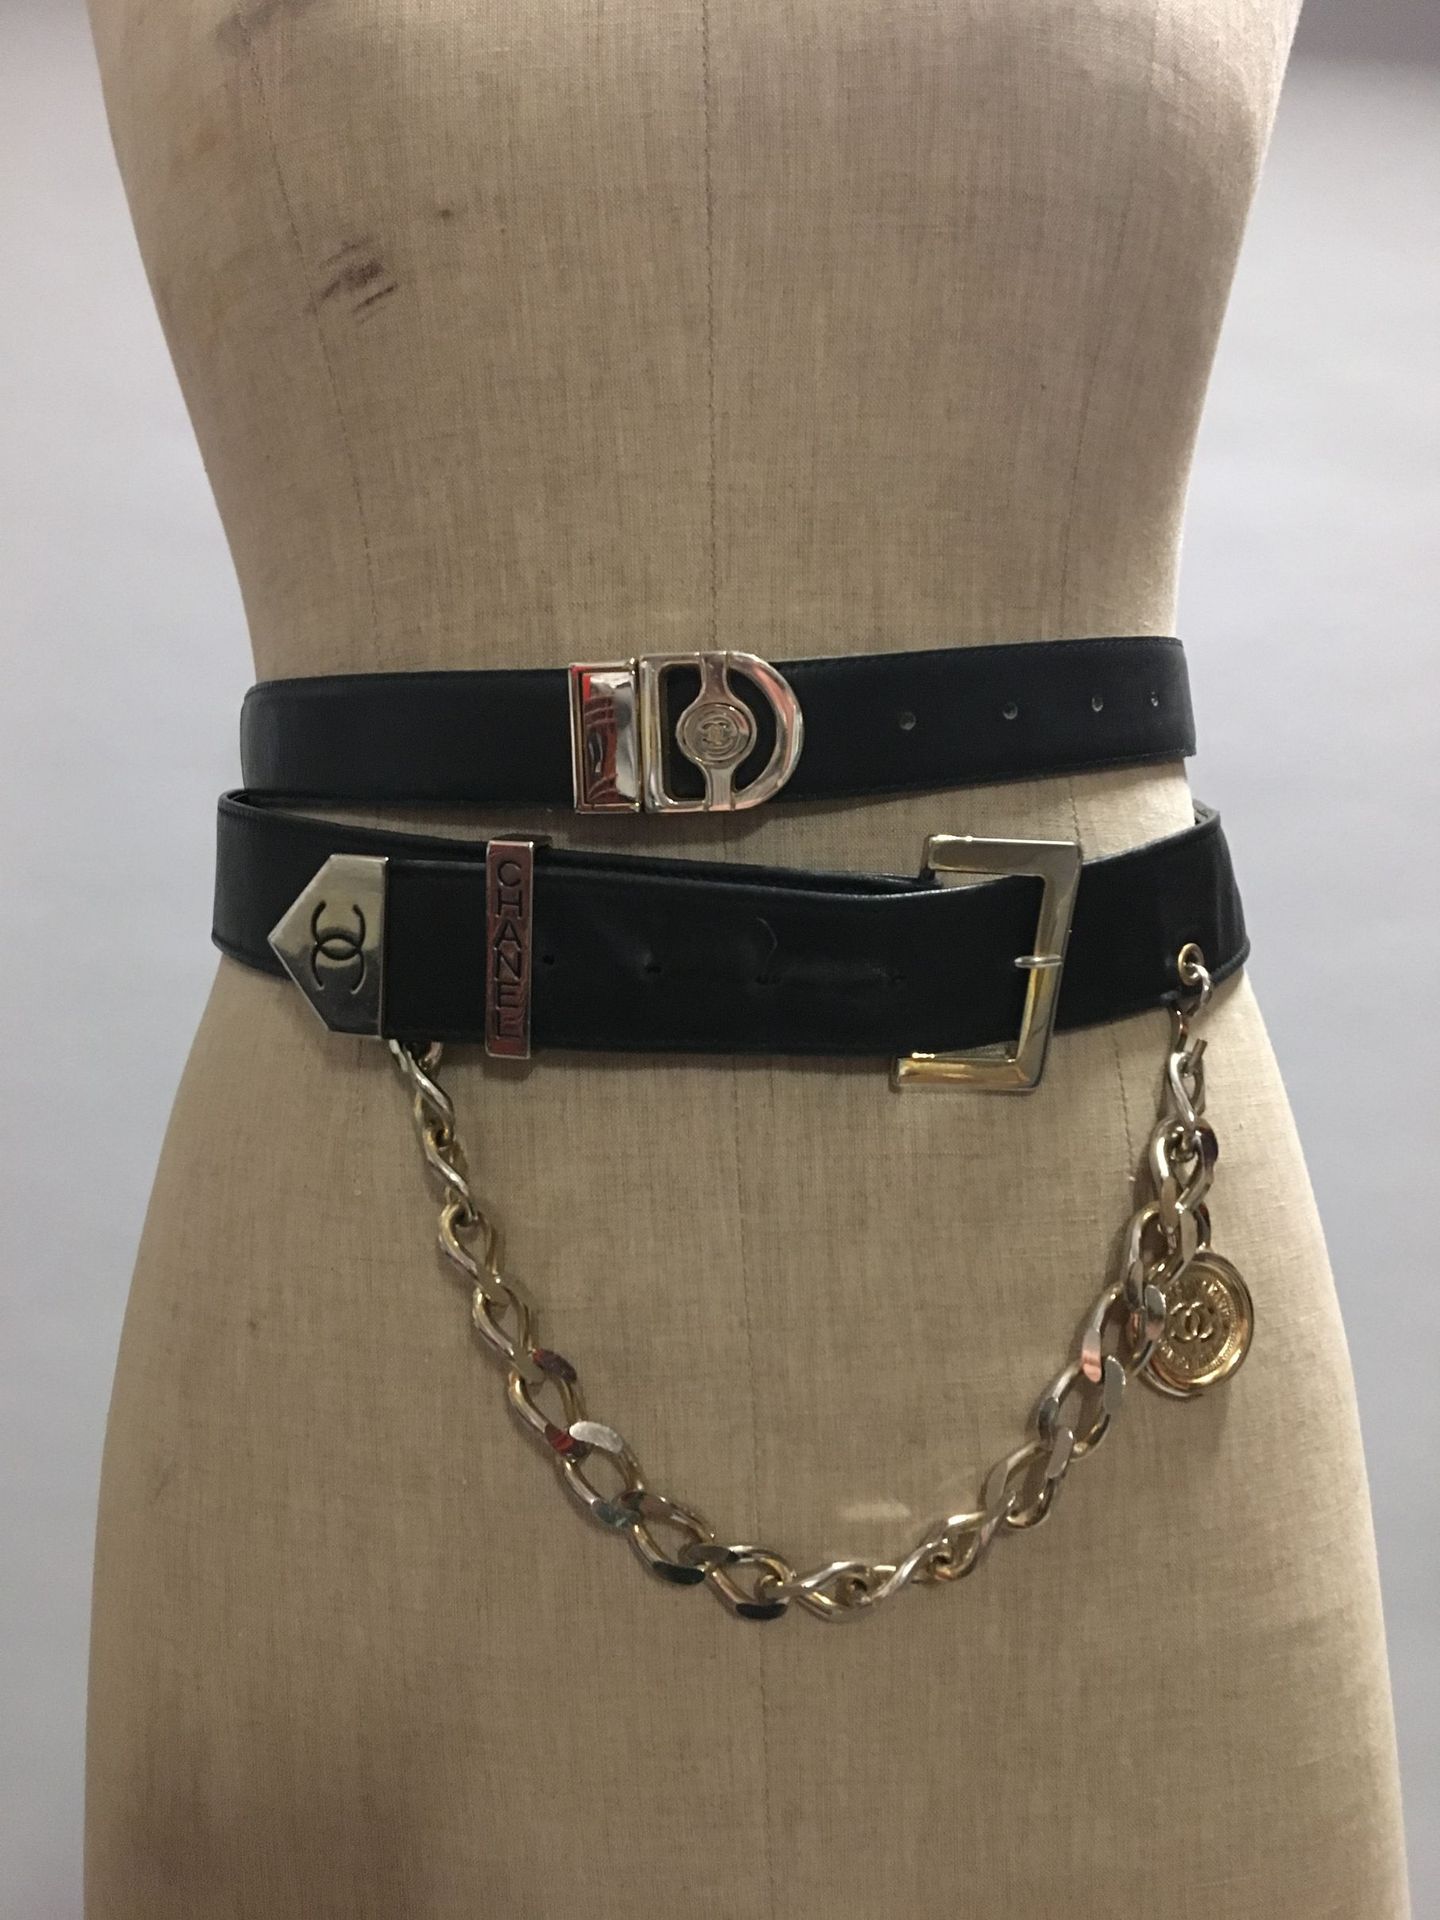 CHANEL: Set of 2 black leather belts, one of which has a…